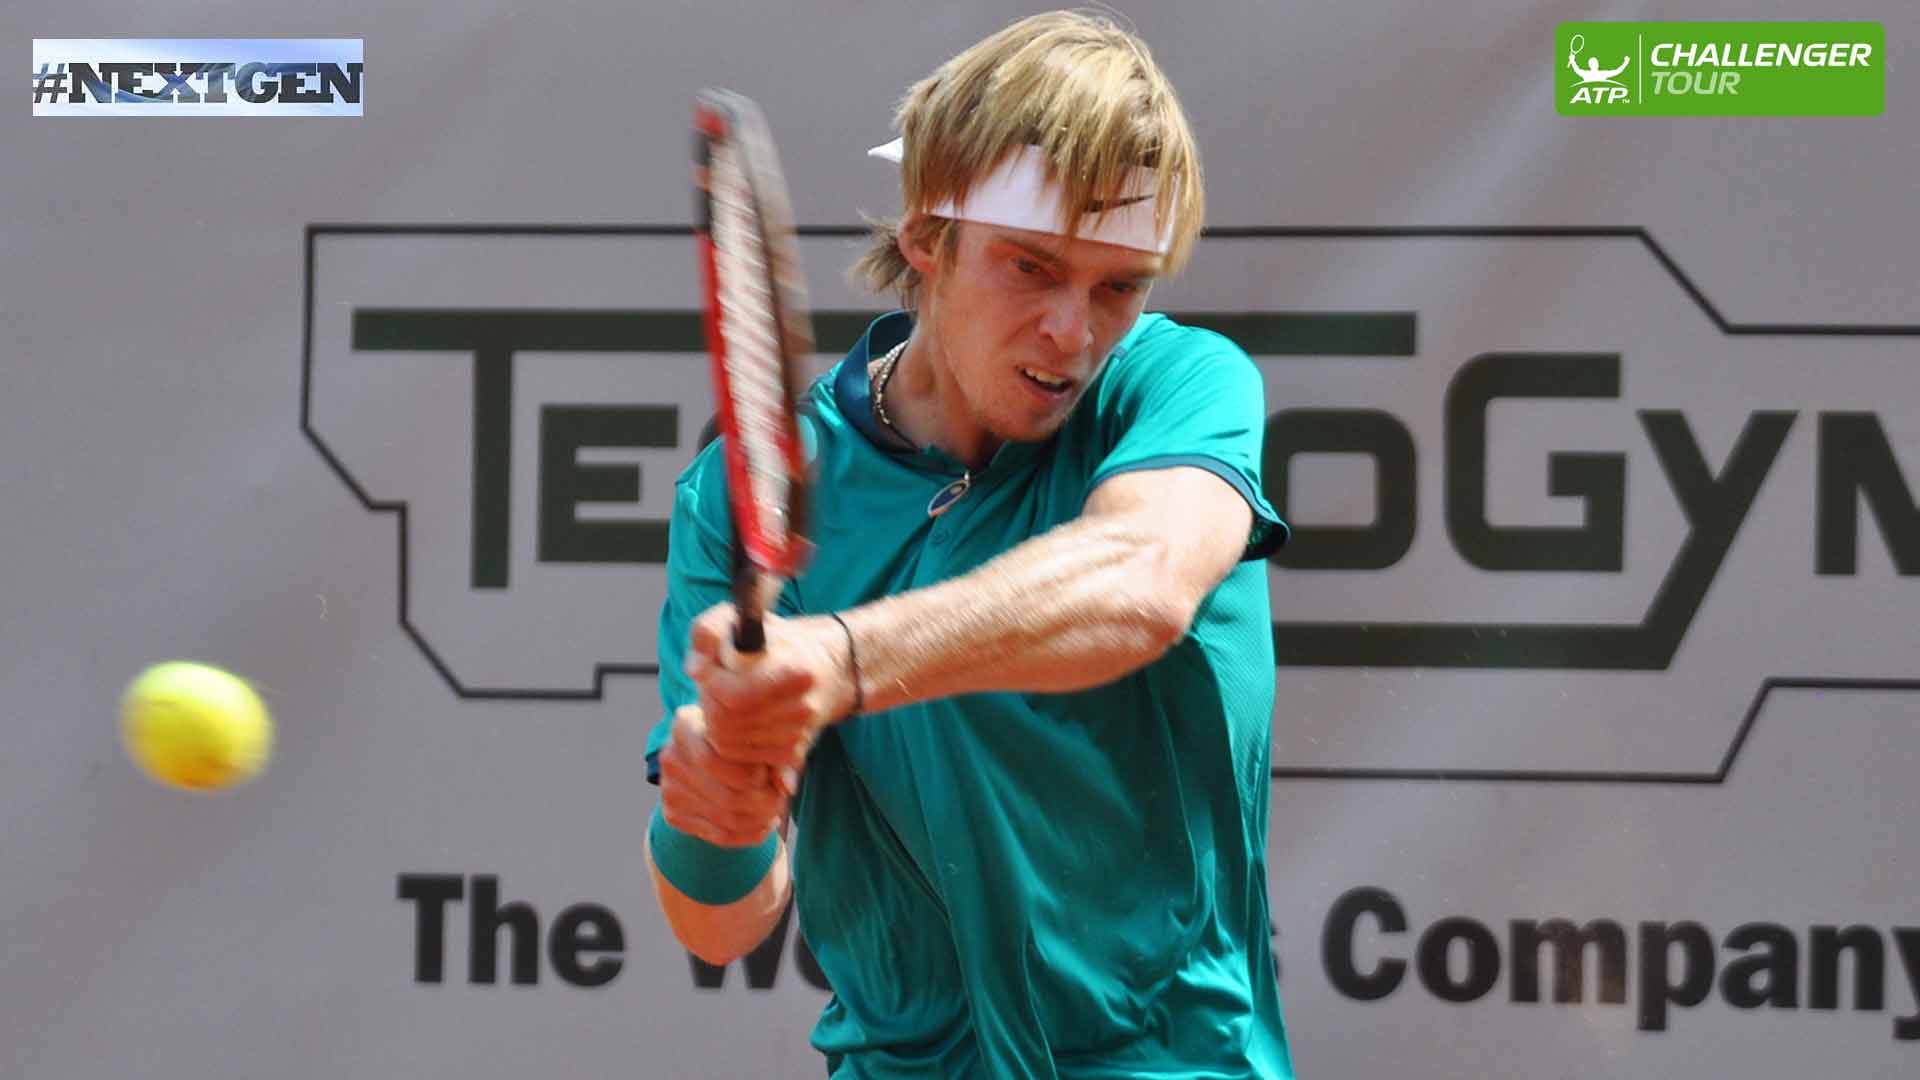 #NextGen star Andrey Rublev looks for his second ATP Challenger Tour title of the year in Cortina.